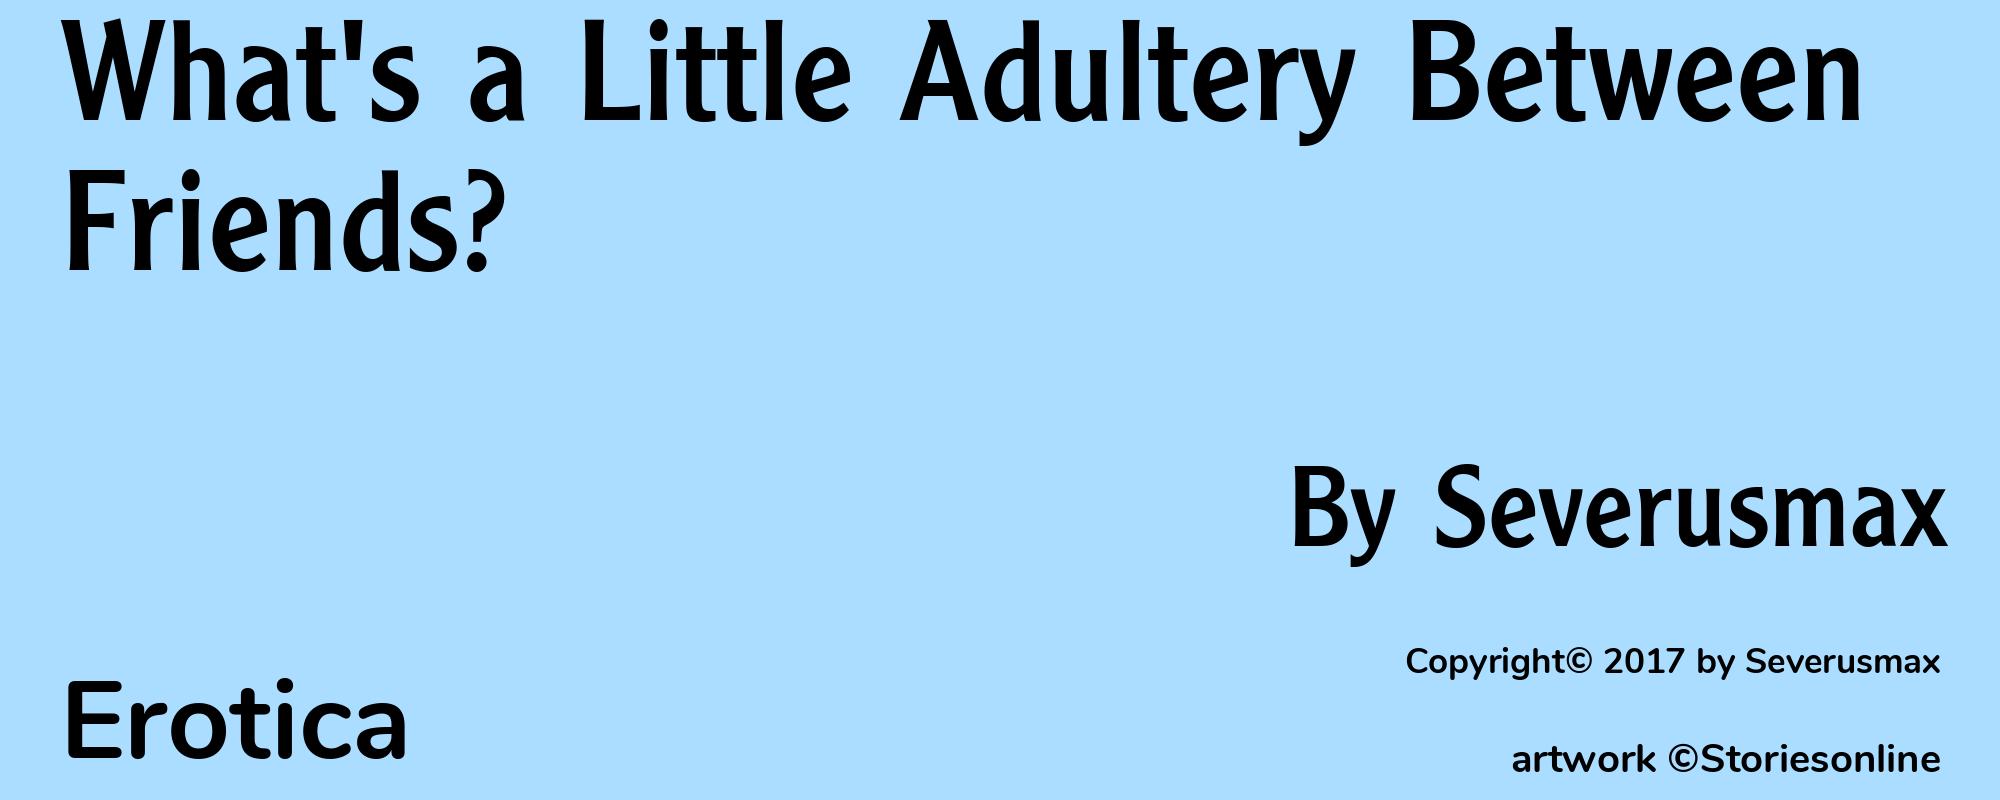 What's a Little Adultery Between Friends? - Cover